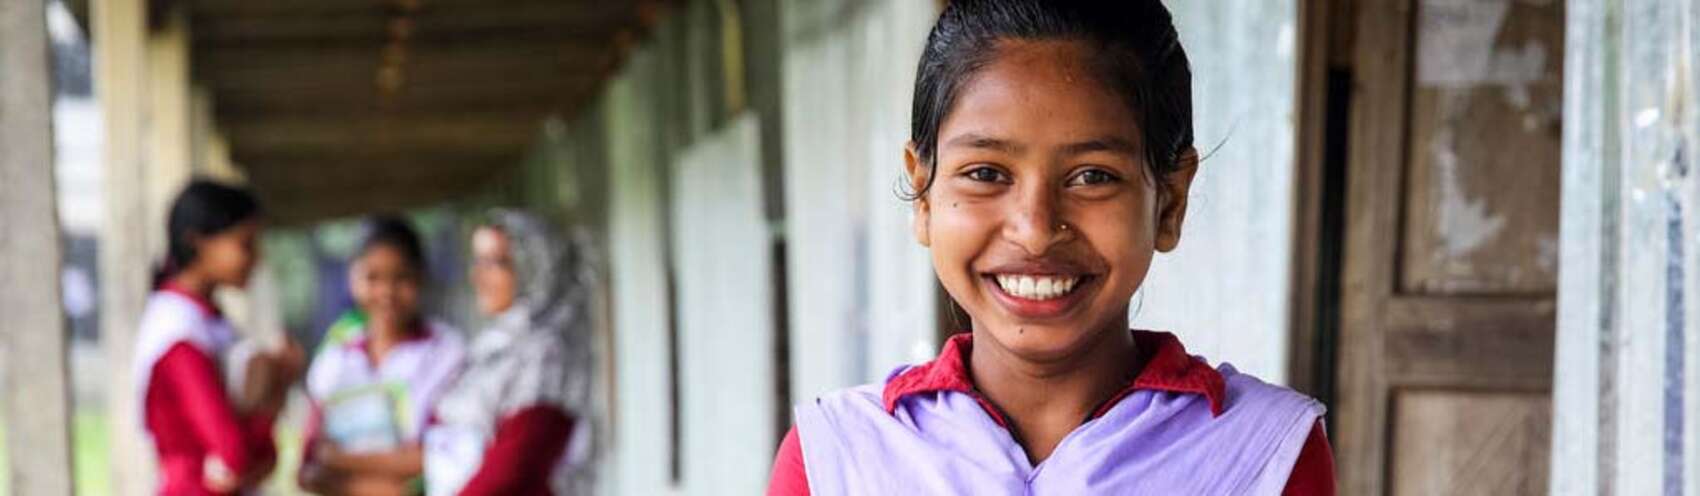 A girl holding a textbook smiles while standing in the courtyard outside her school in Bangladesh.